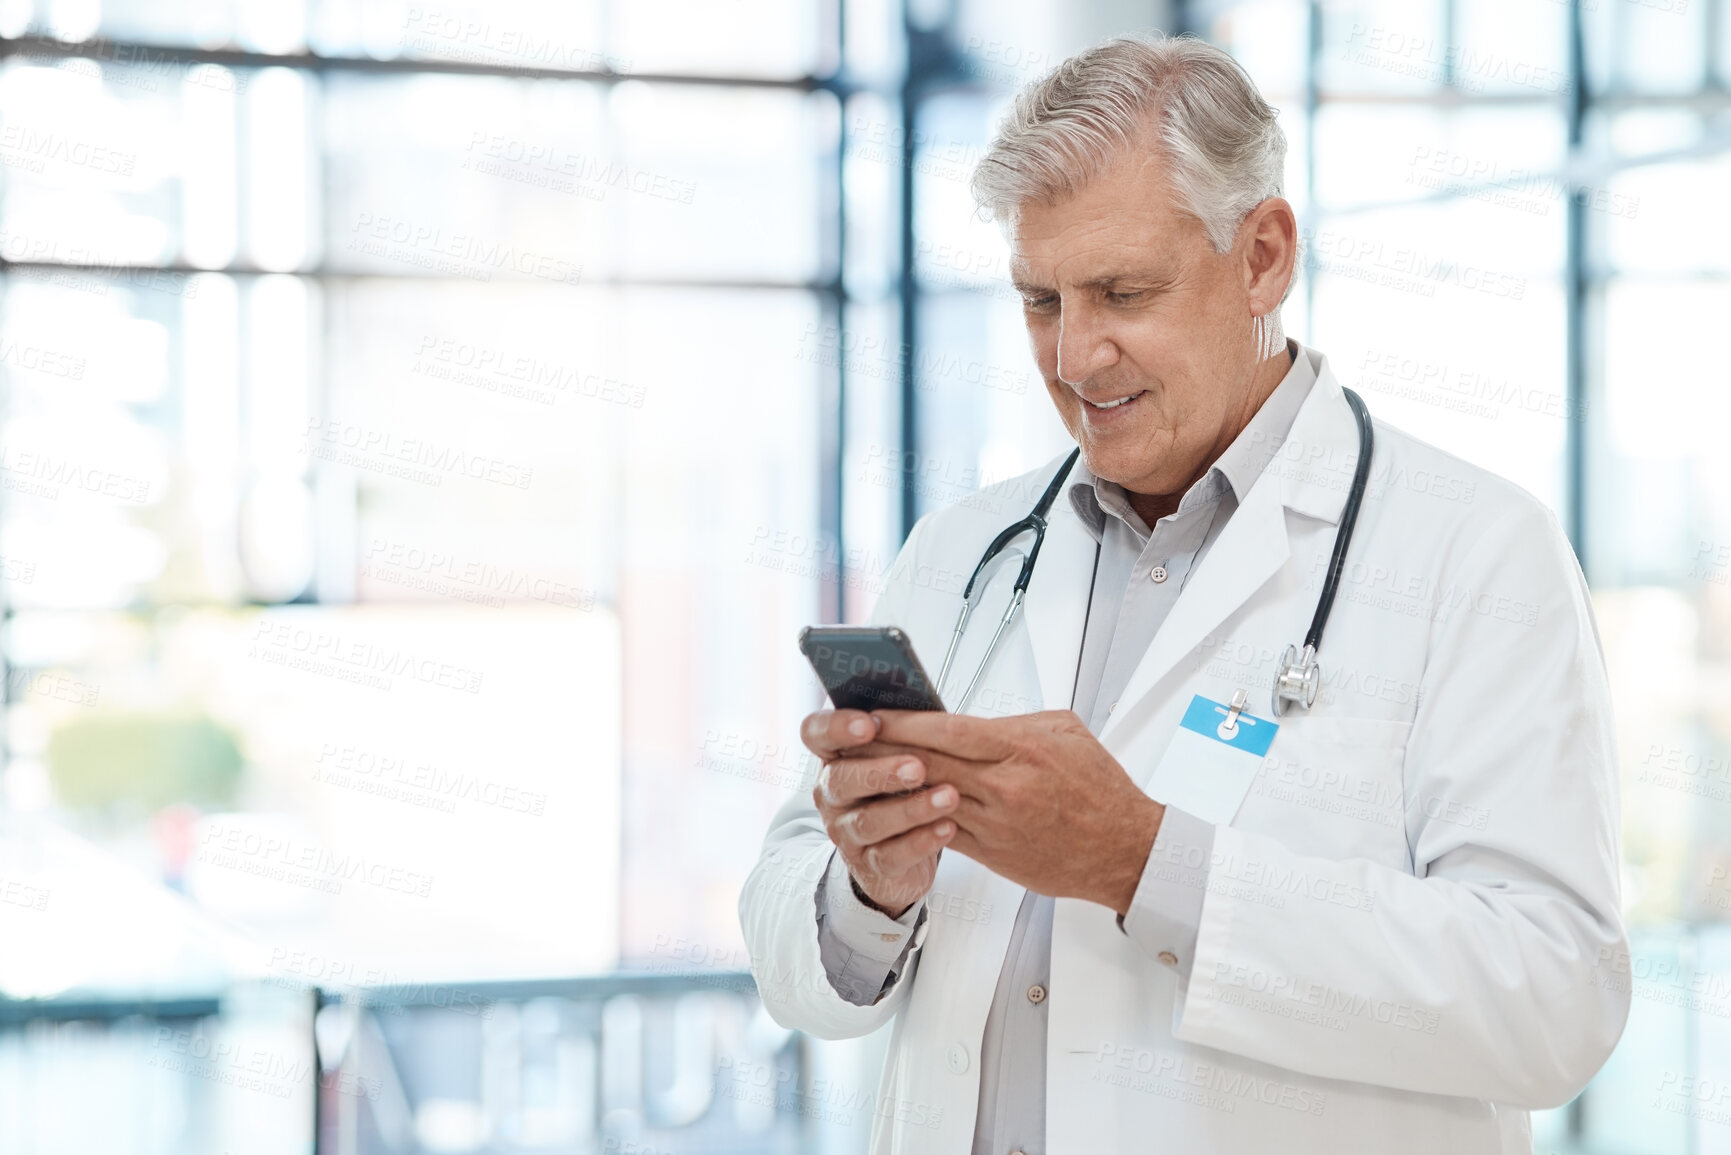 Buy stock photo Shot of a doctor using a cellphone in a hospital